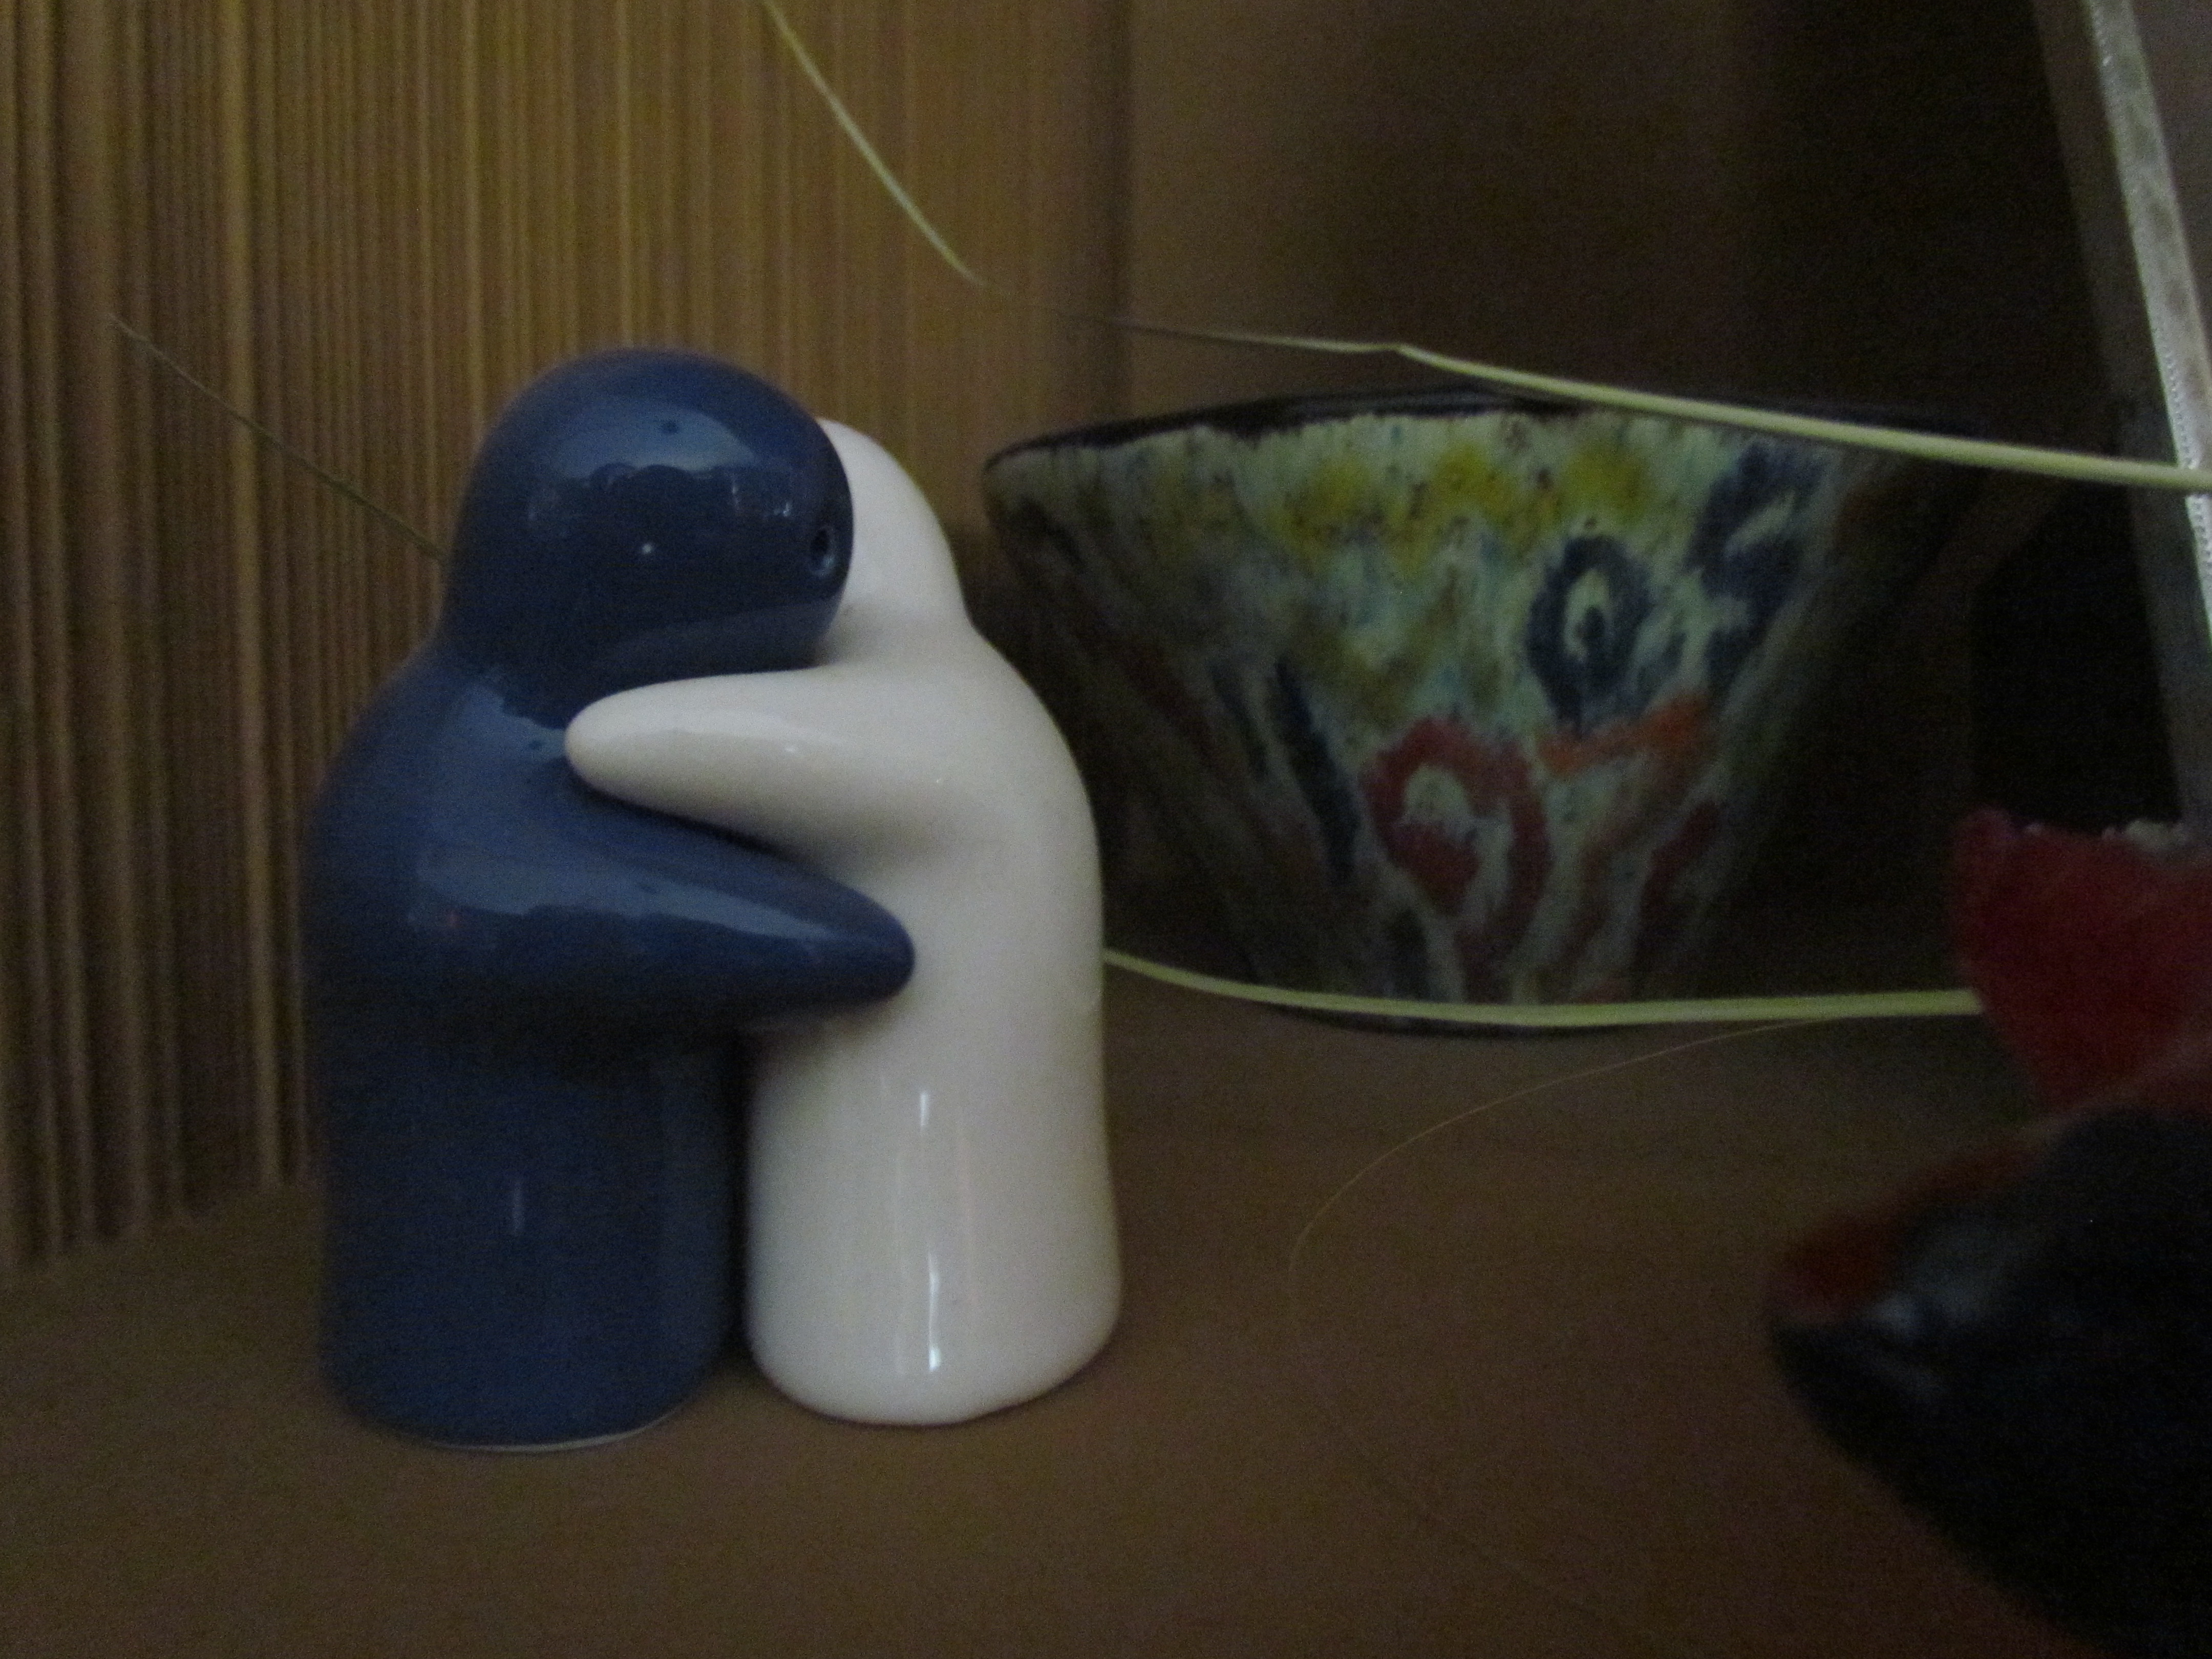 File:Hugging Blue and White Salt and Pepper Shakers.JPG - Wikimedia Commons